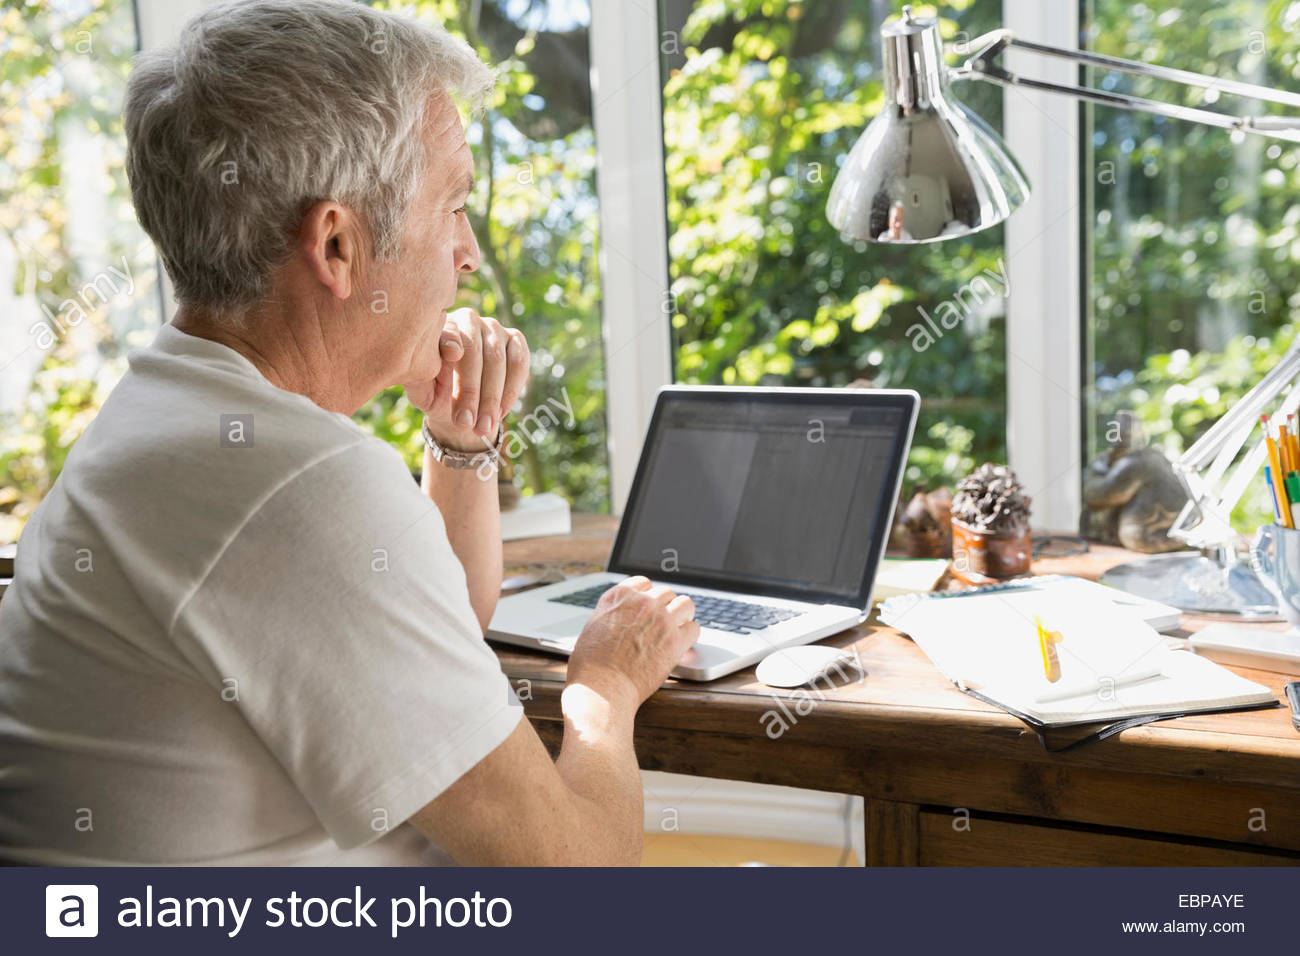 Man working at laptop in office Banque D'Images